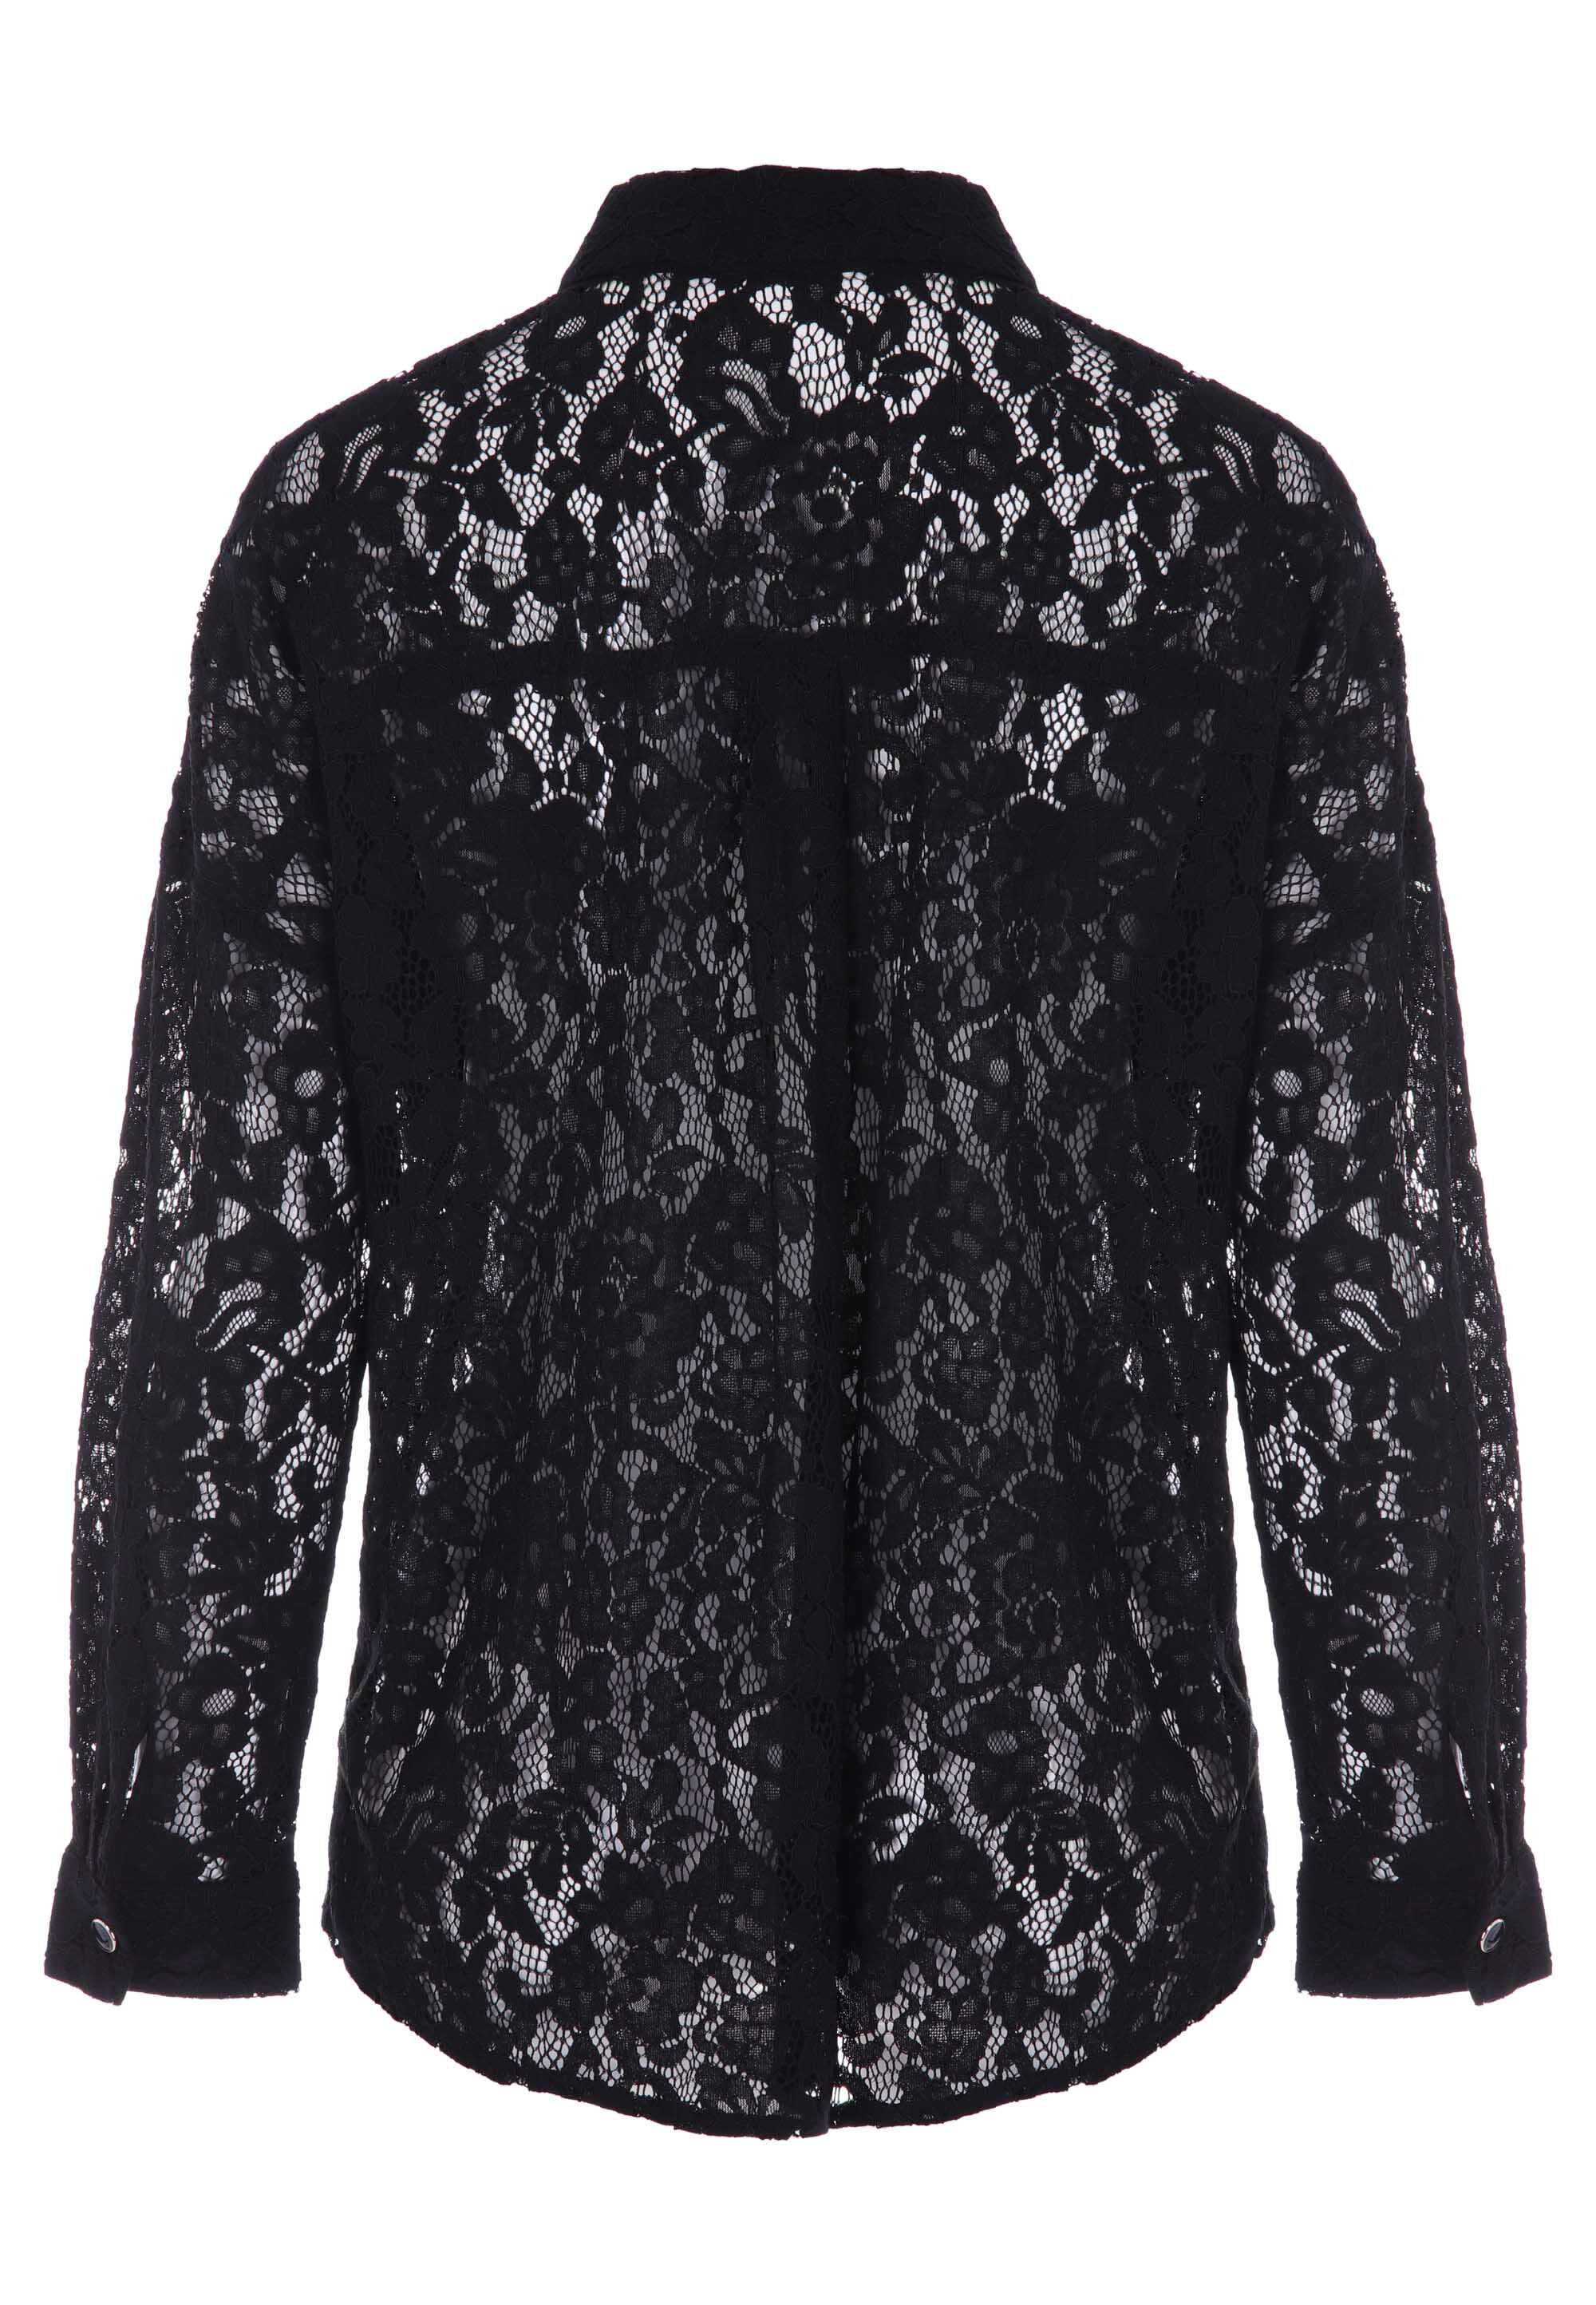 Lace Tops & Blouses, Black & white lace tops